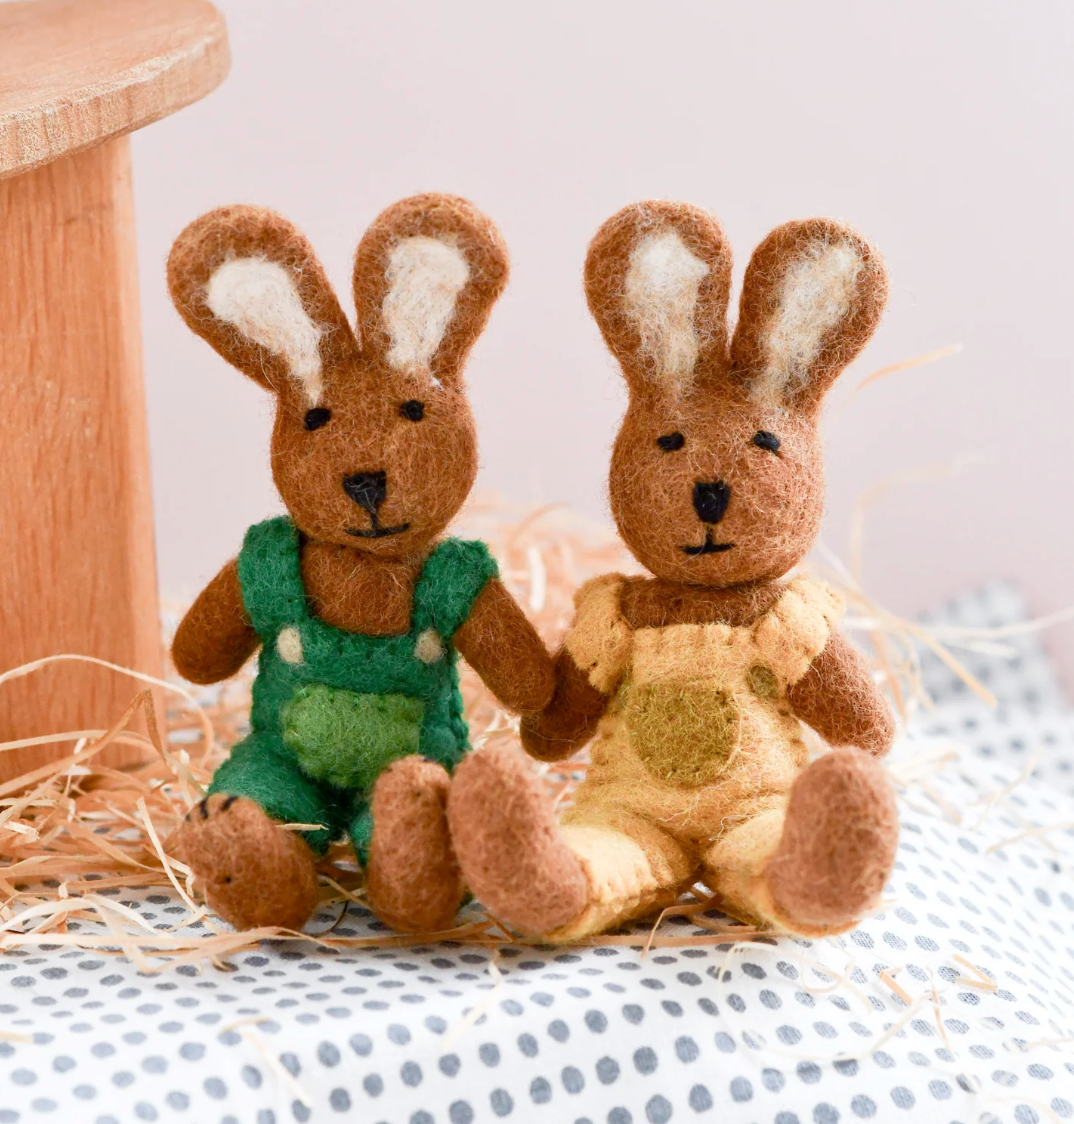 Felt Brown Hare Rabbit With Green Overalls Toy